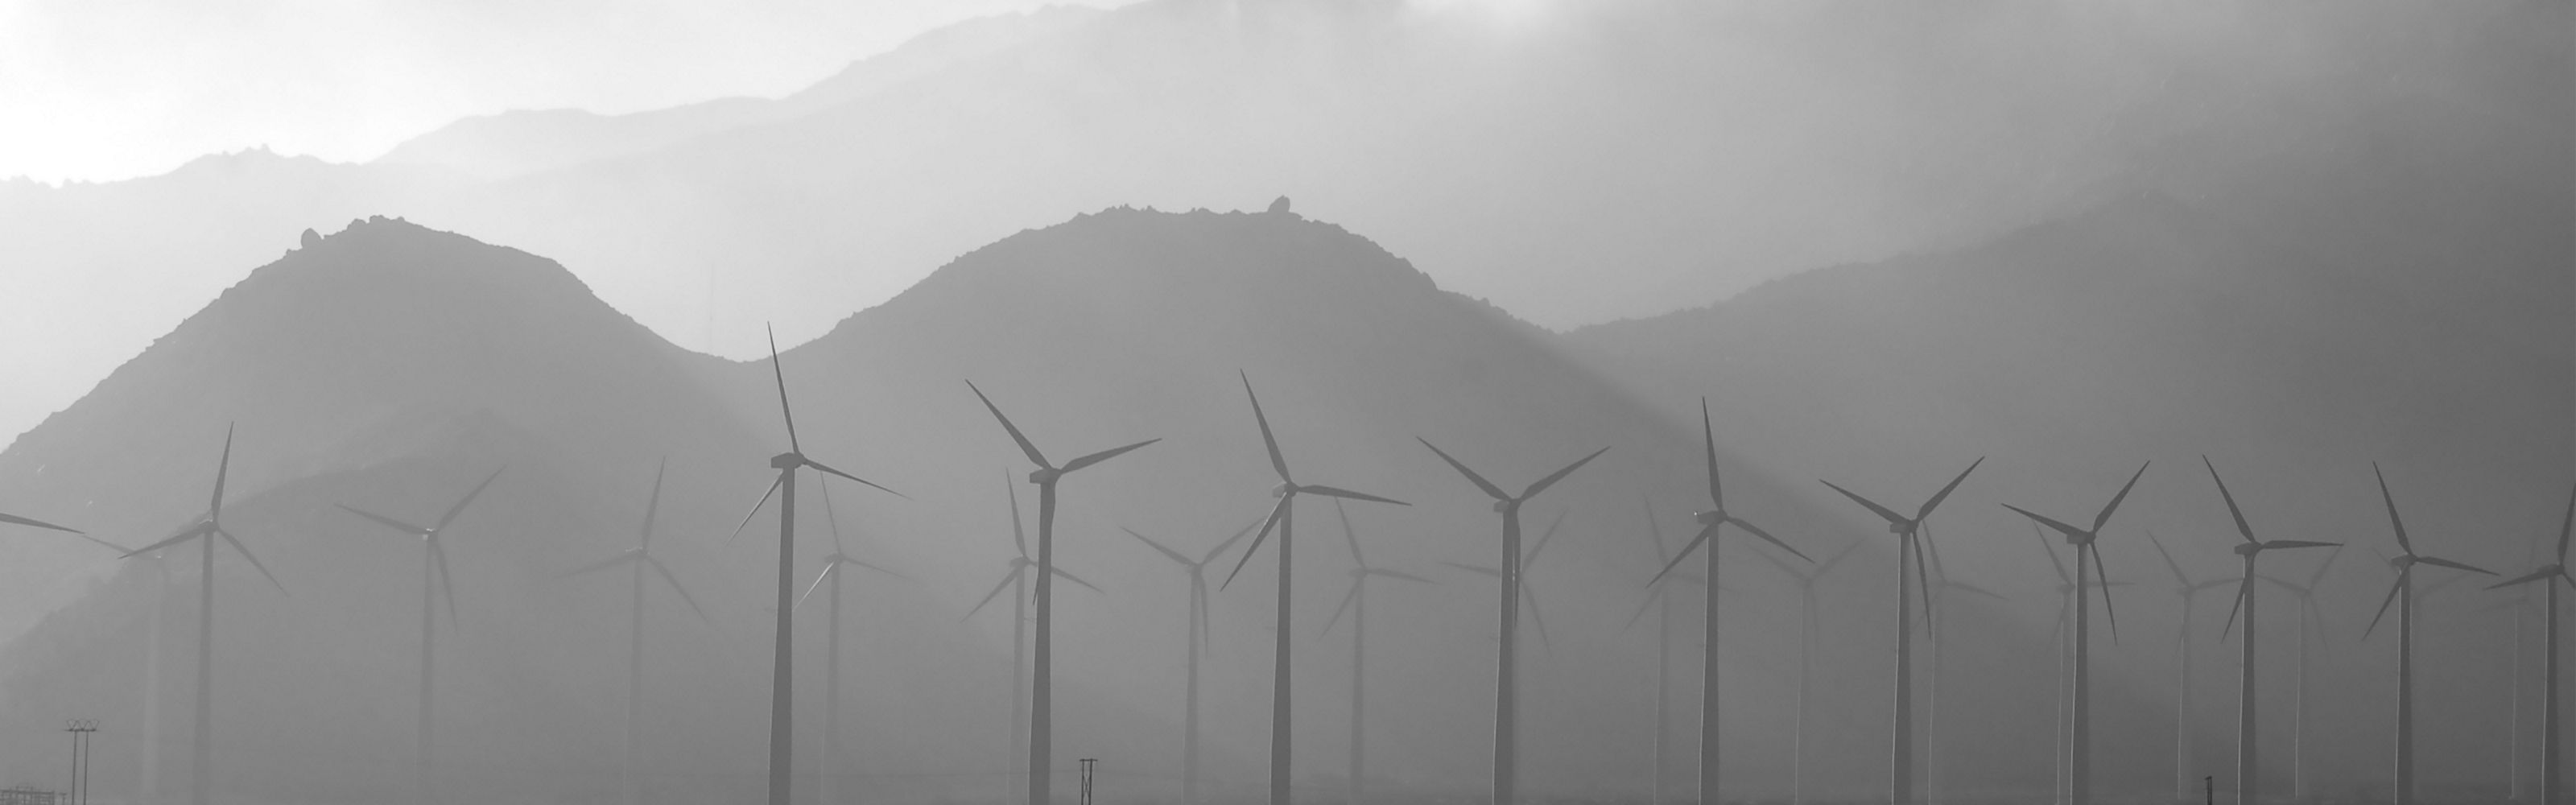 Wind turbines against a mountain backdrop